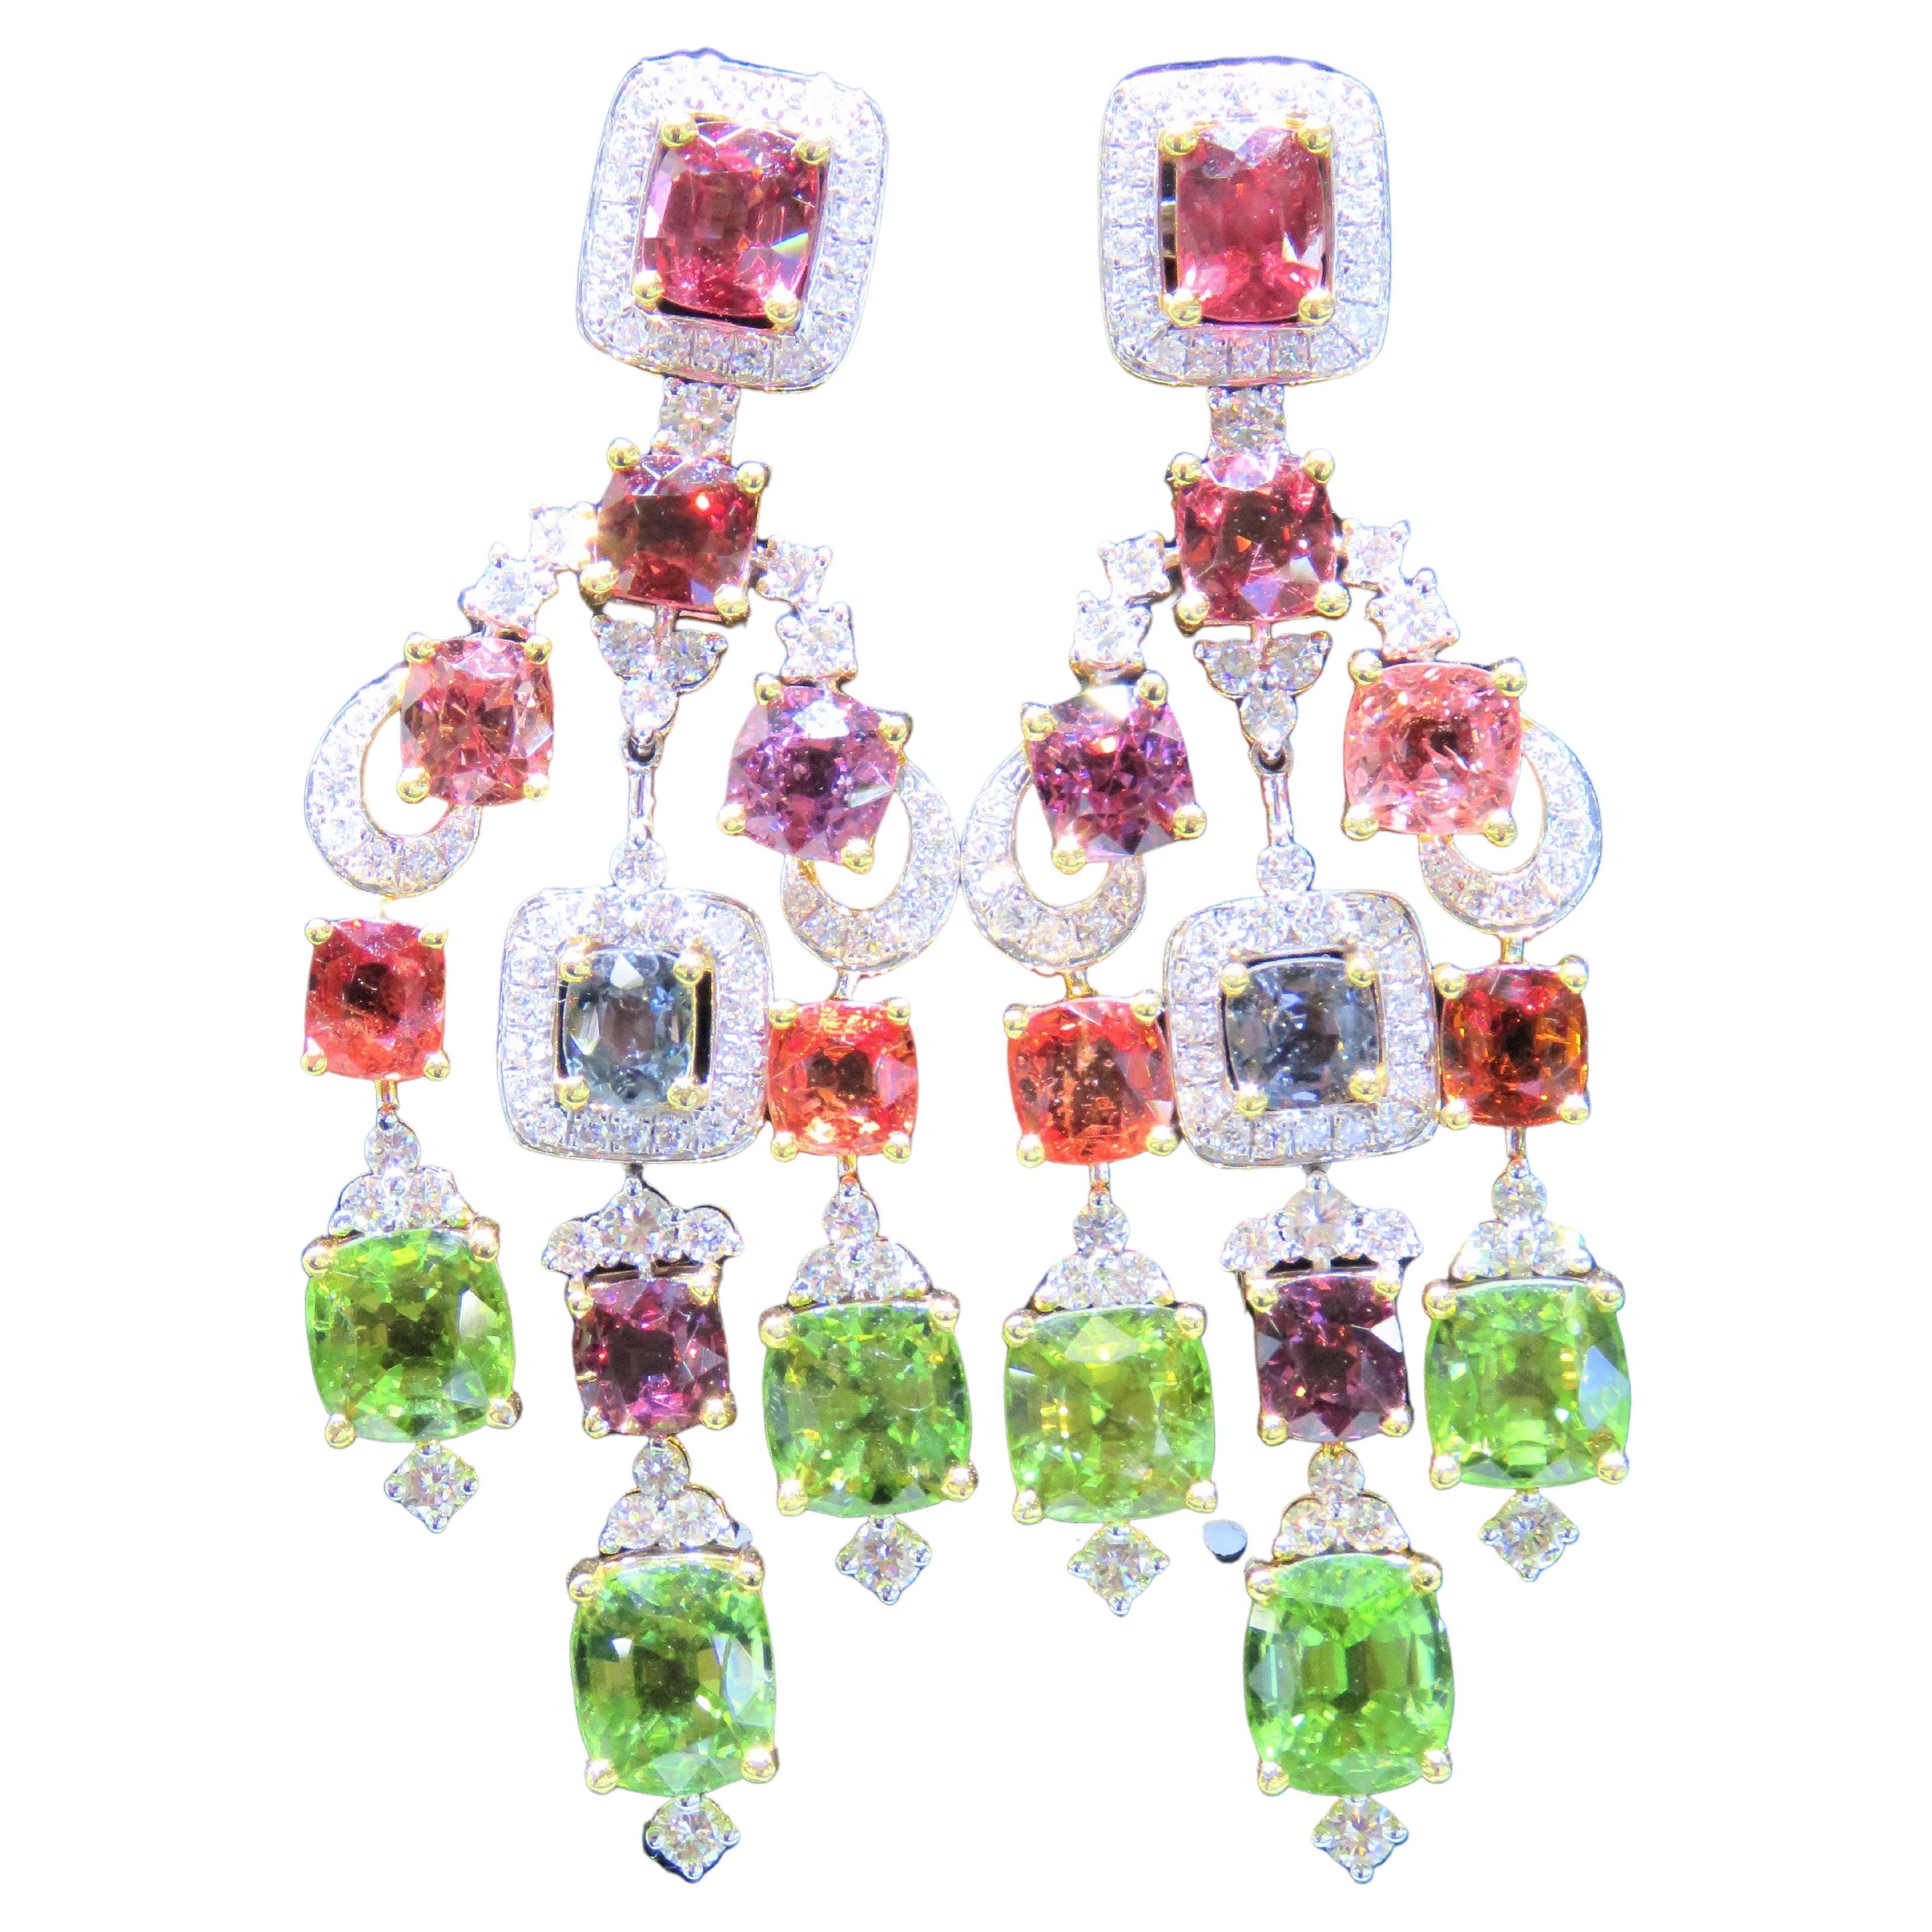 NWT 29, 000 18KT Fancy Large Glittering Rare Colorful Spinel Diamond Earrings For Sale